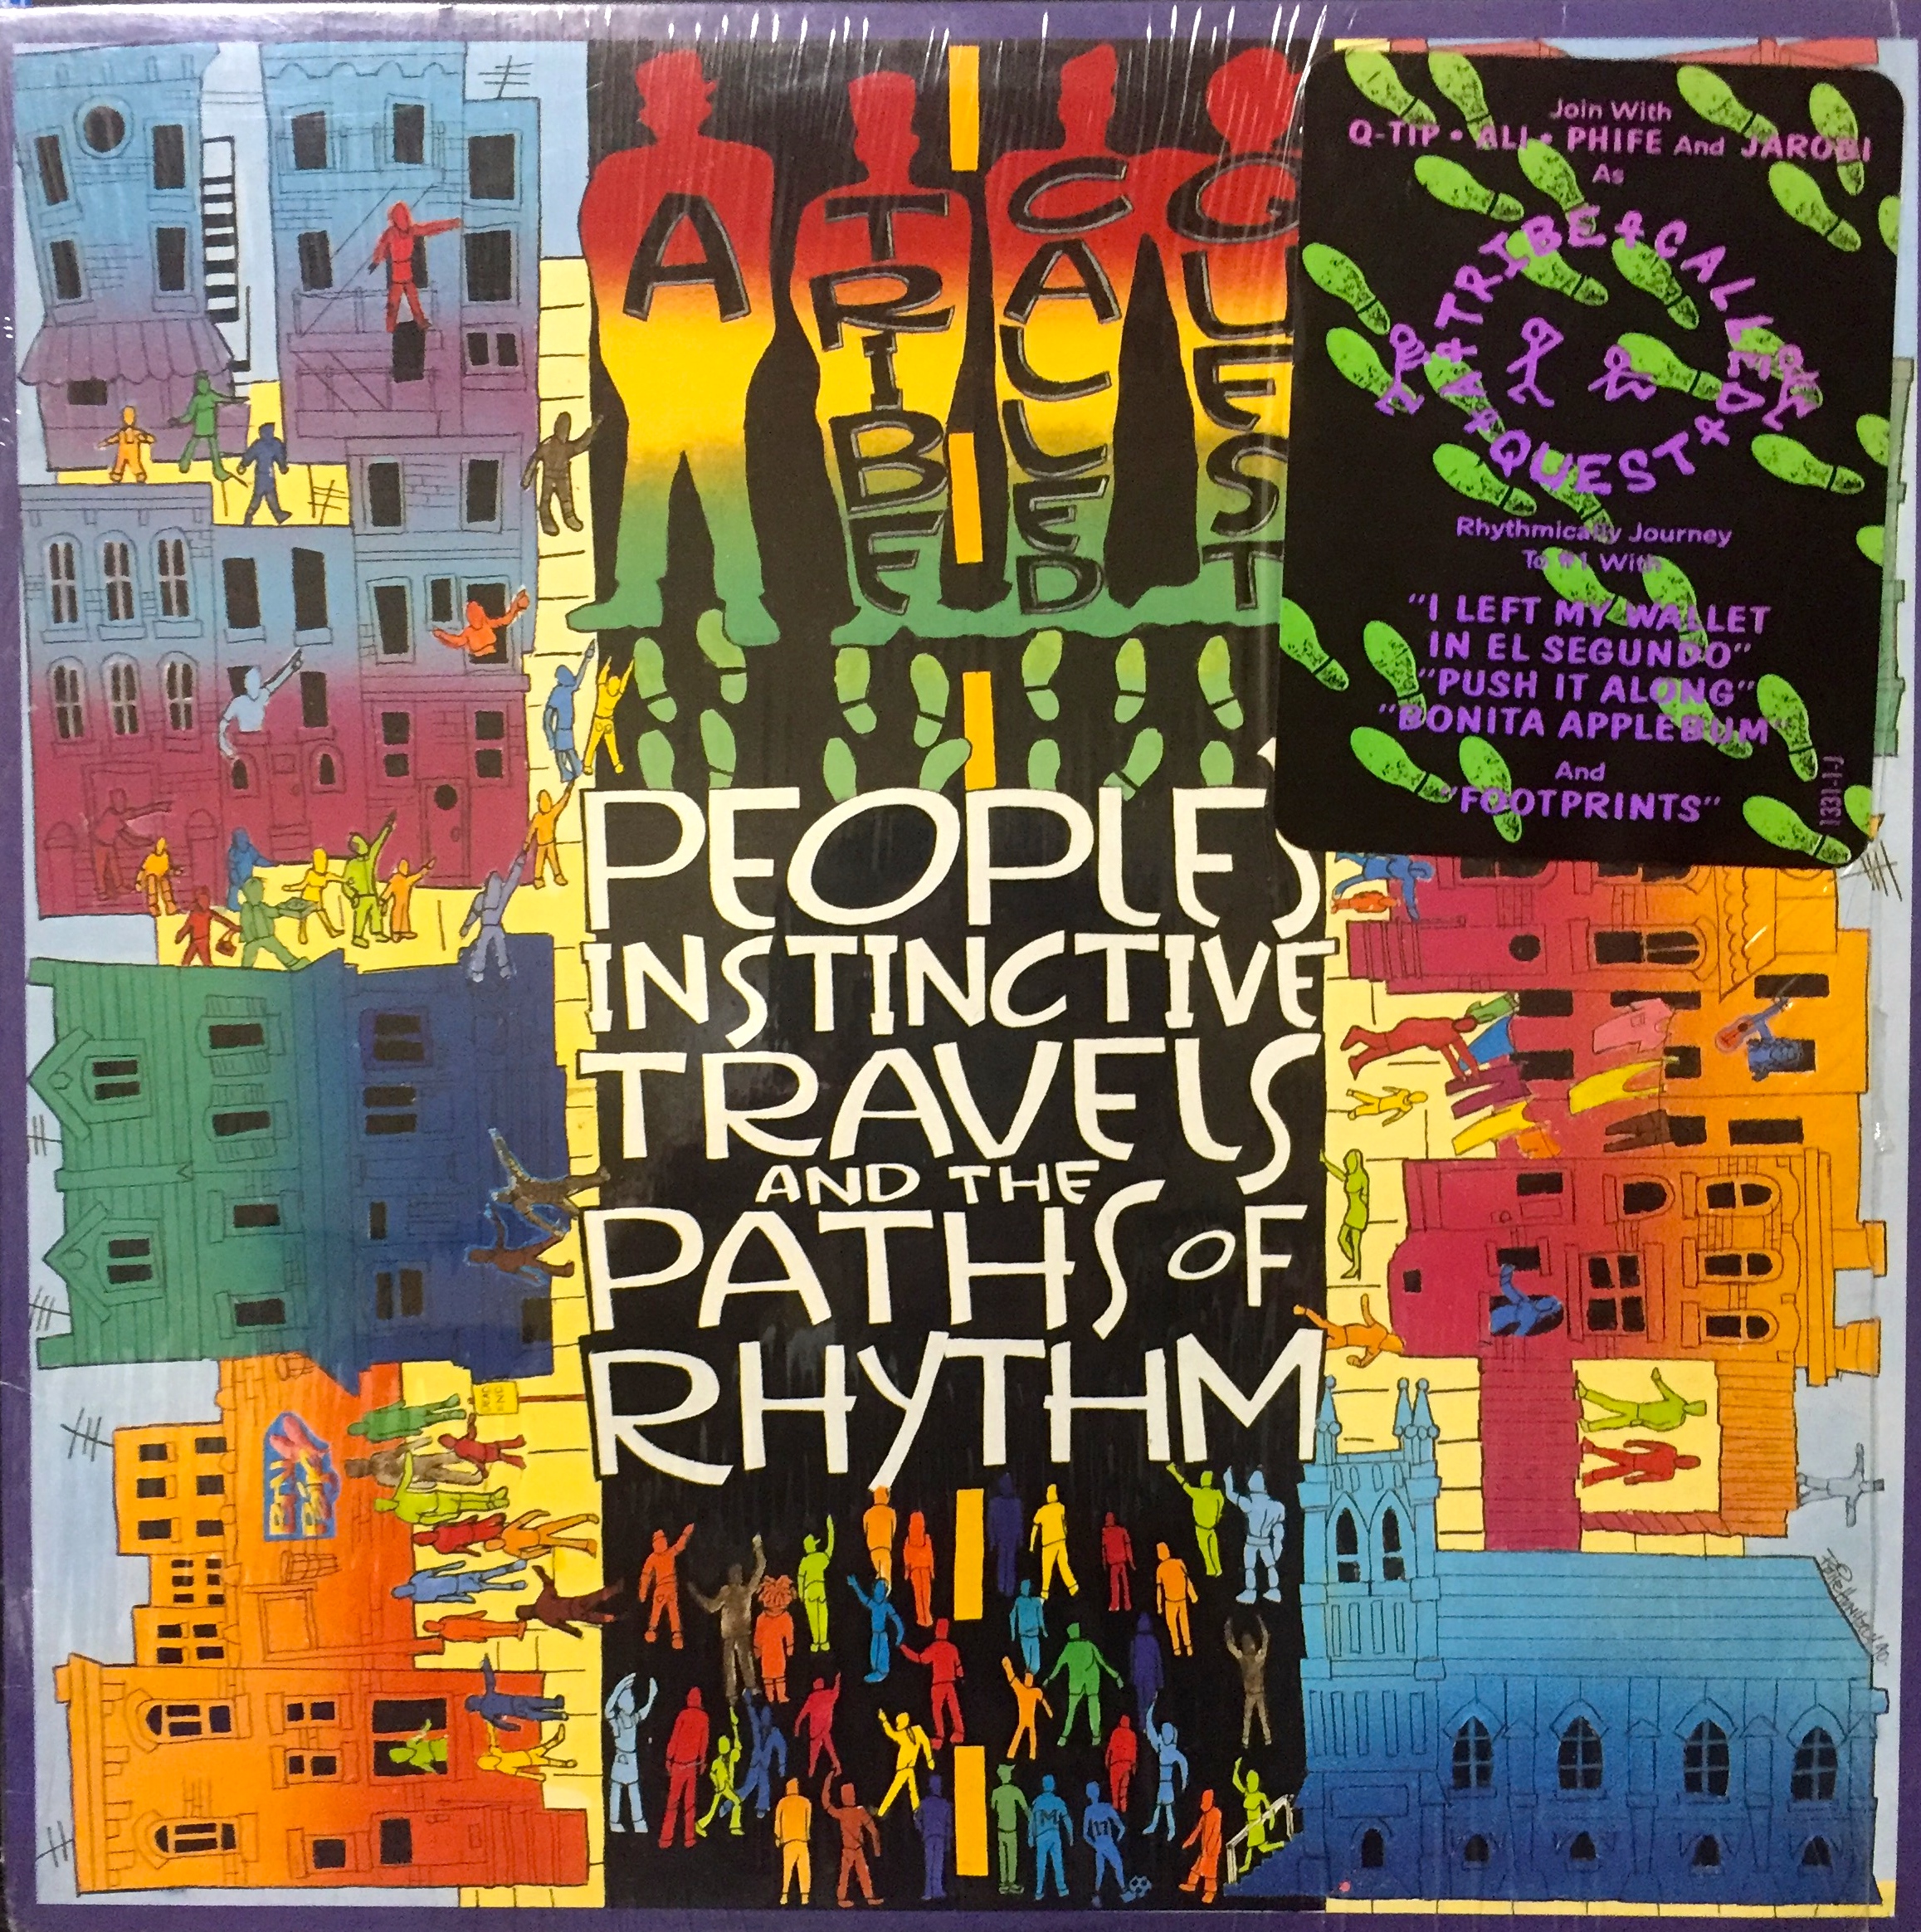 A TRIBE CALLED QUEST/PEOPLE'S INSTINCTIVE TRAVEL & THE PATH OF RHYTHM